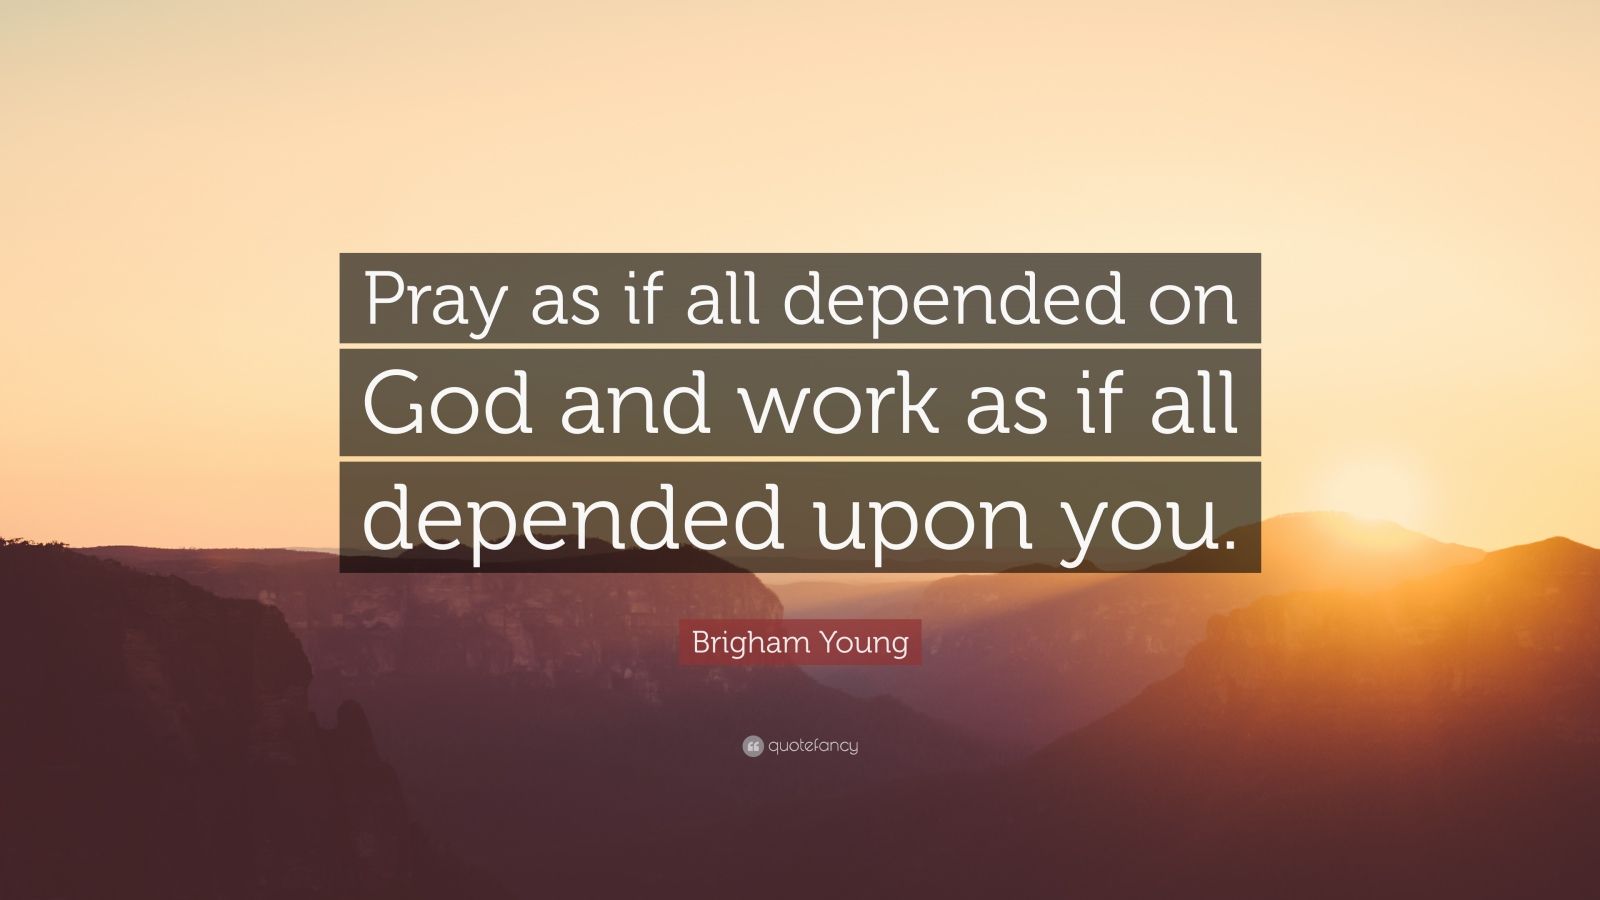 Brigham Young Quote: “Pray as if all depended on God and work as if all